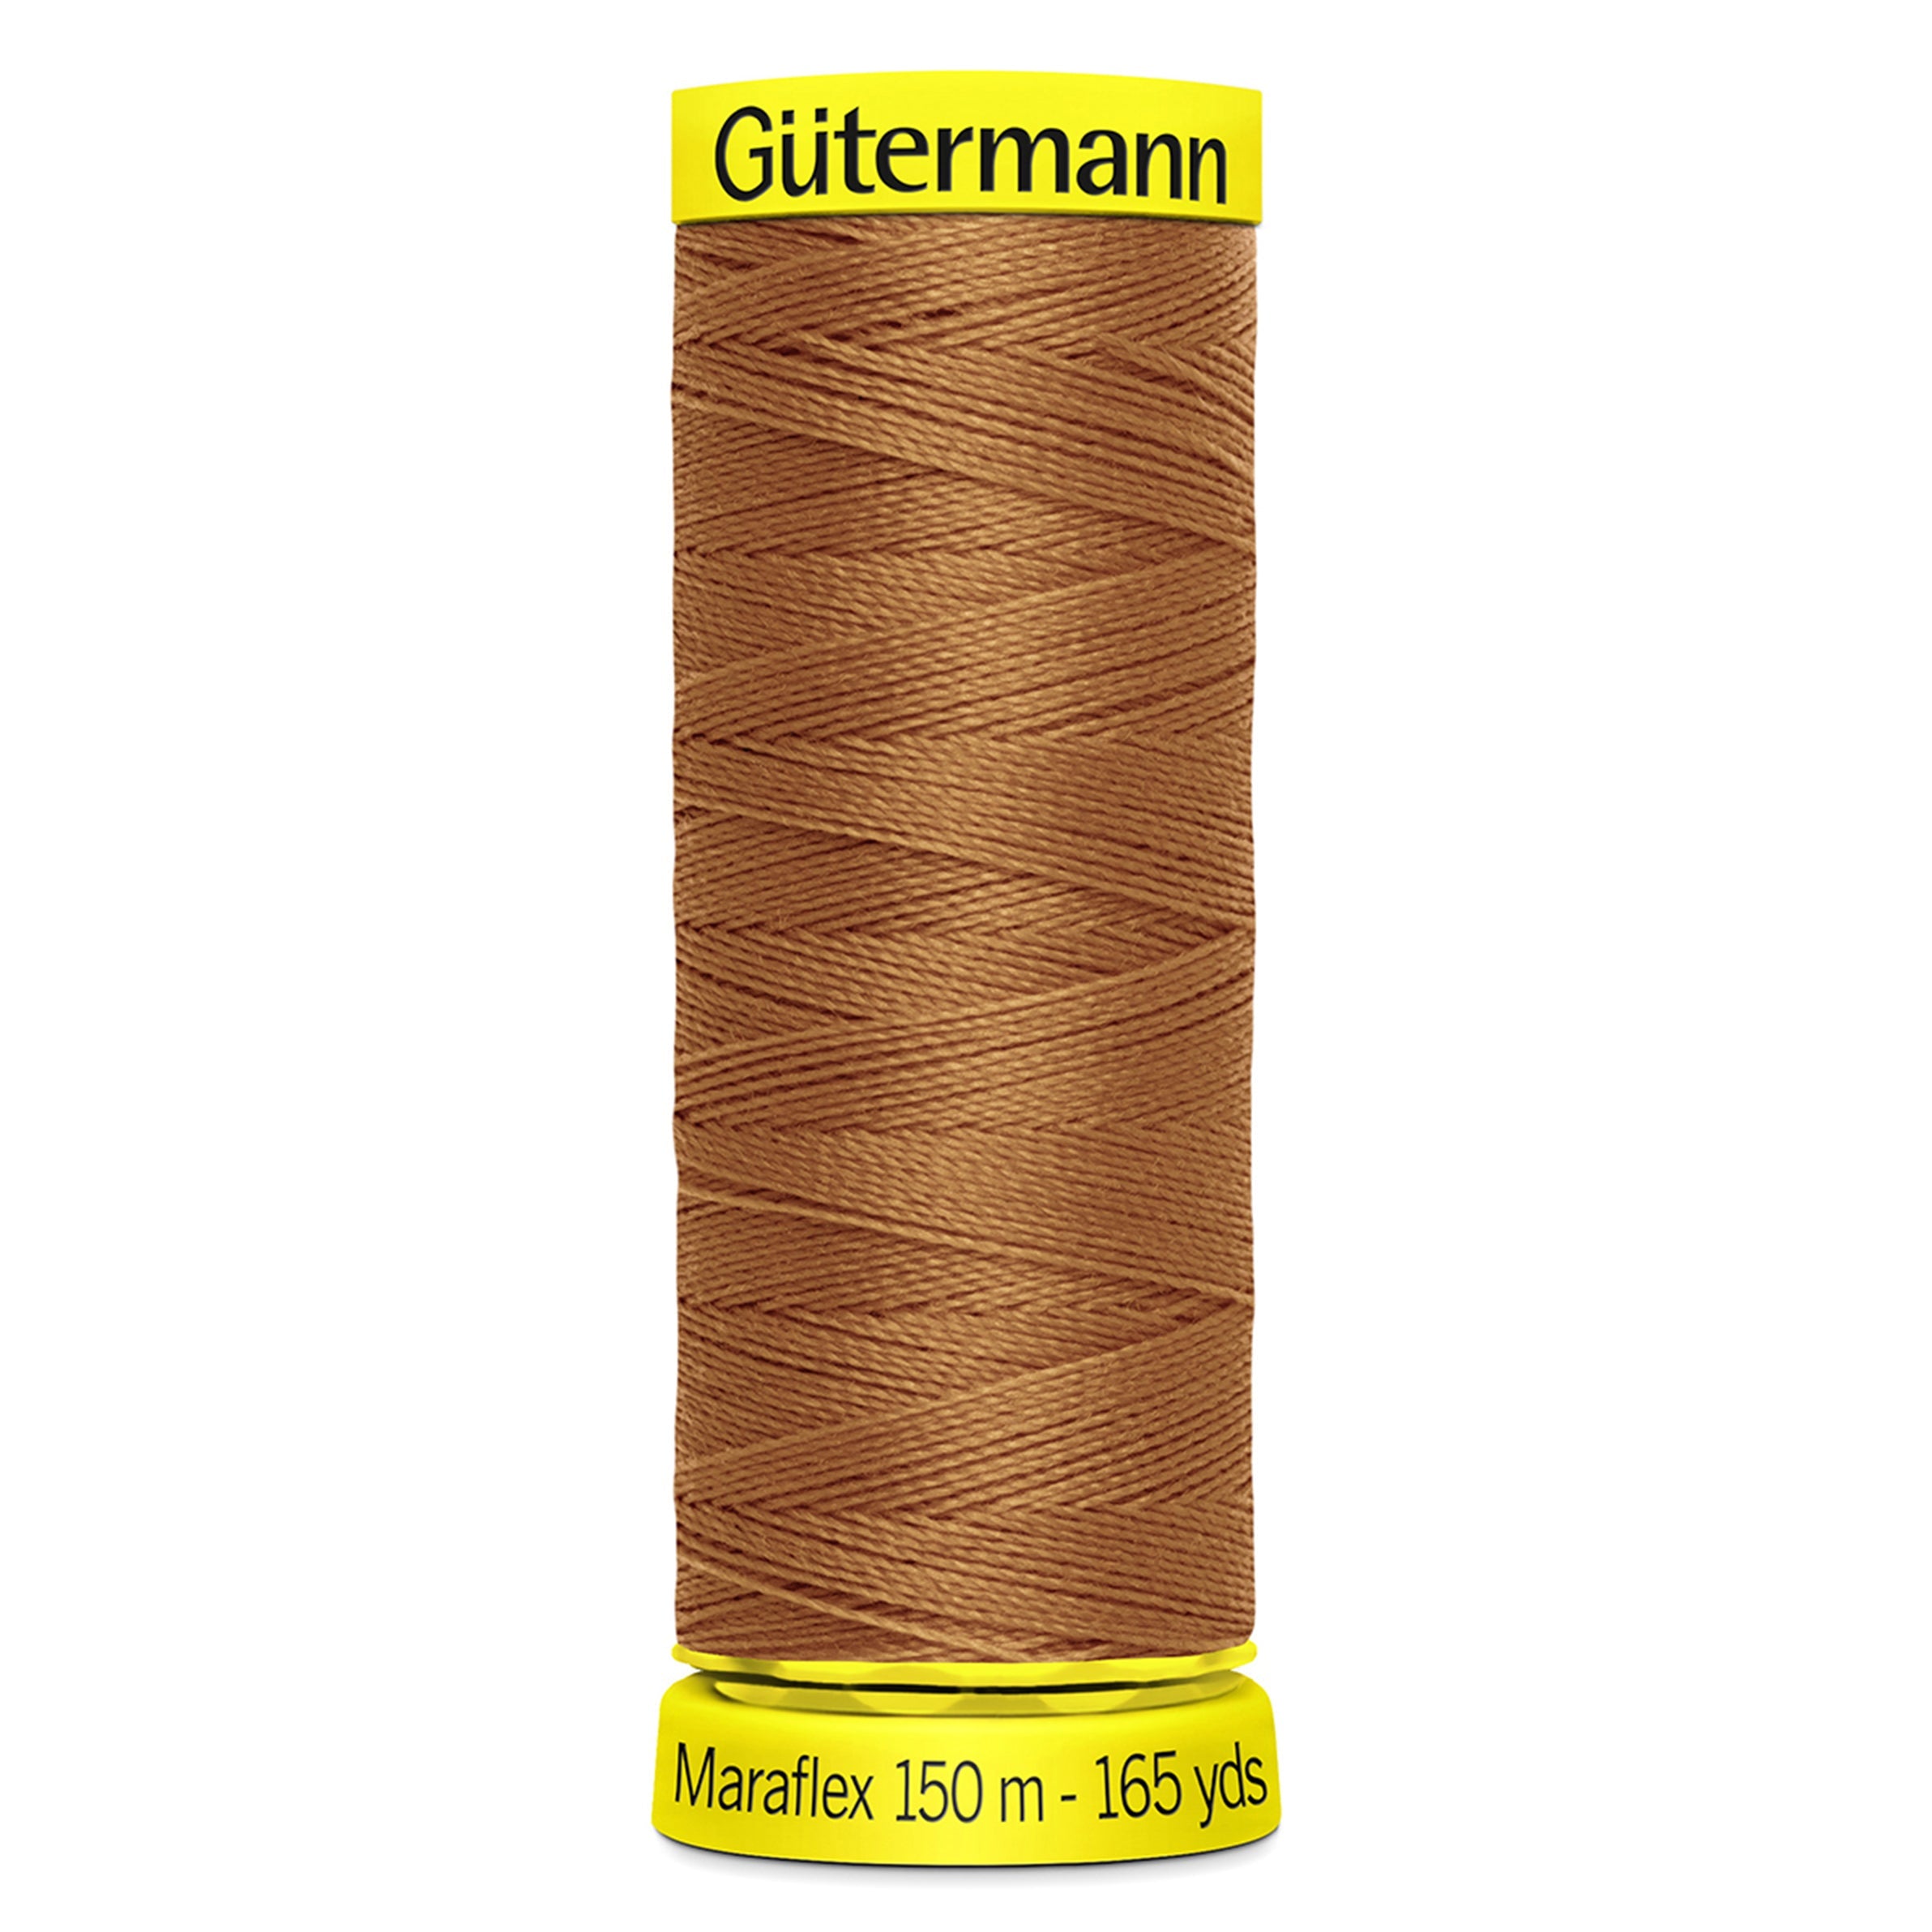 Gutermann Maraflex Stretchy Sewing Thread 150m colour 448 from Jaycotts Sewing Supplies